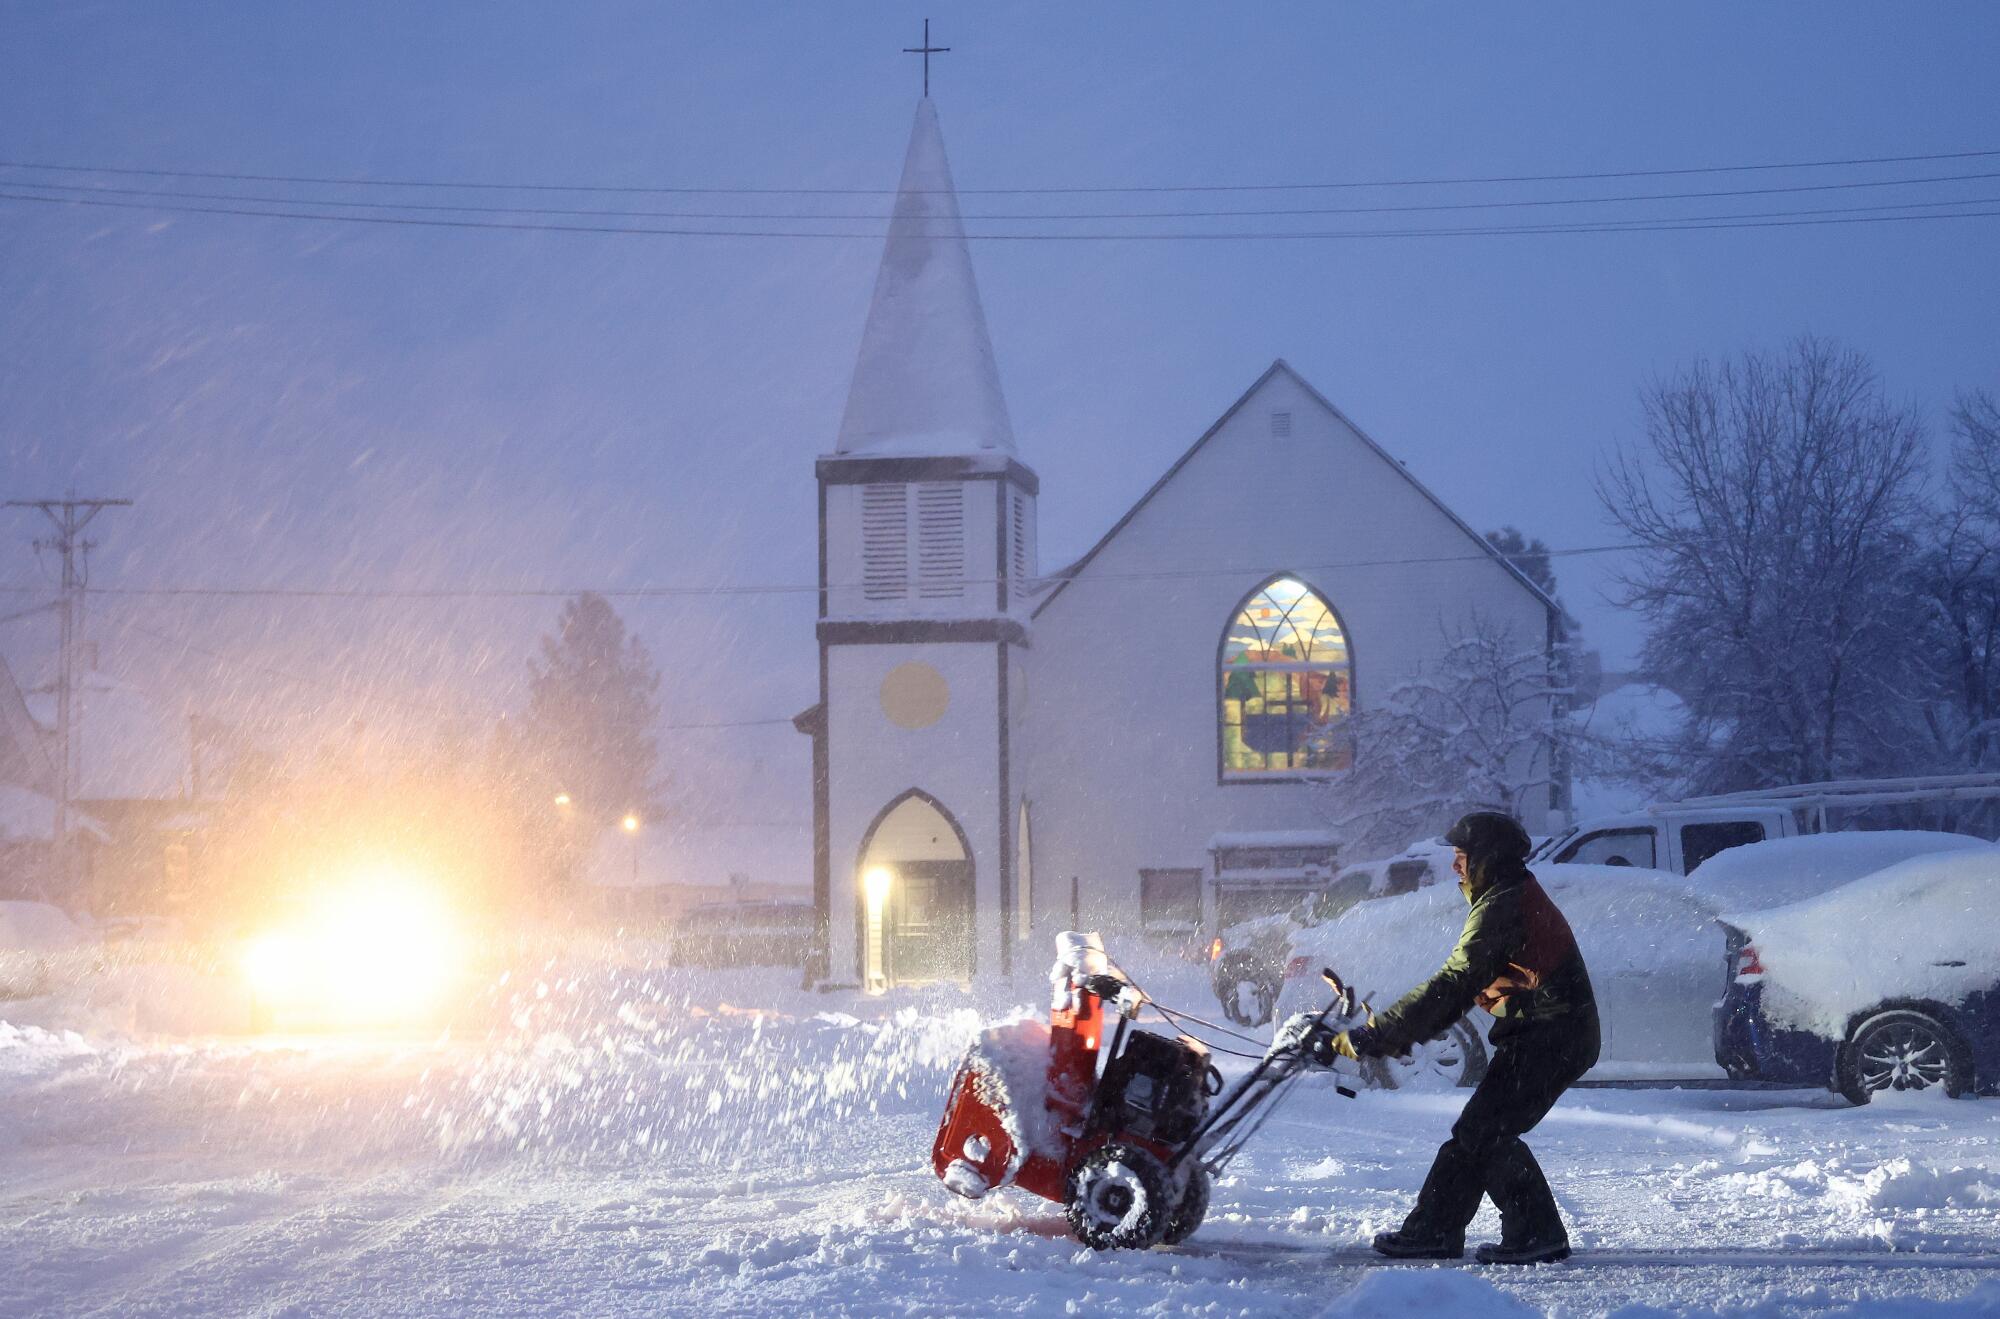 Michael Murray uses a snow blower in the dark during heavy snowfall in front of a church.